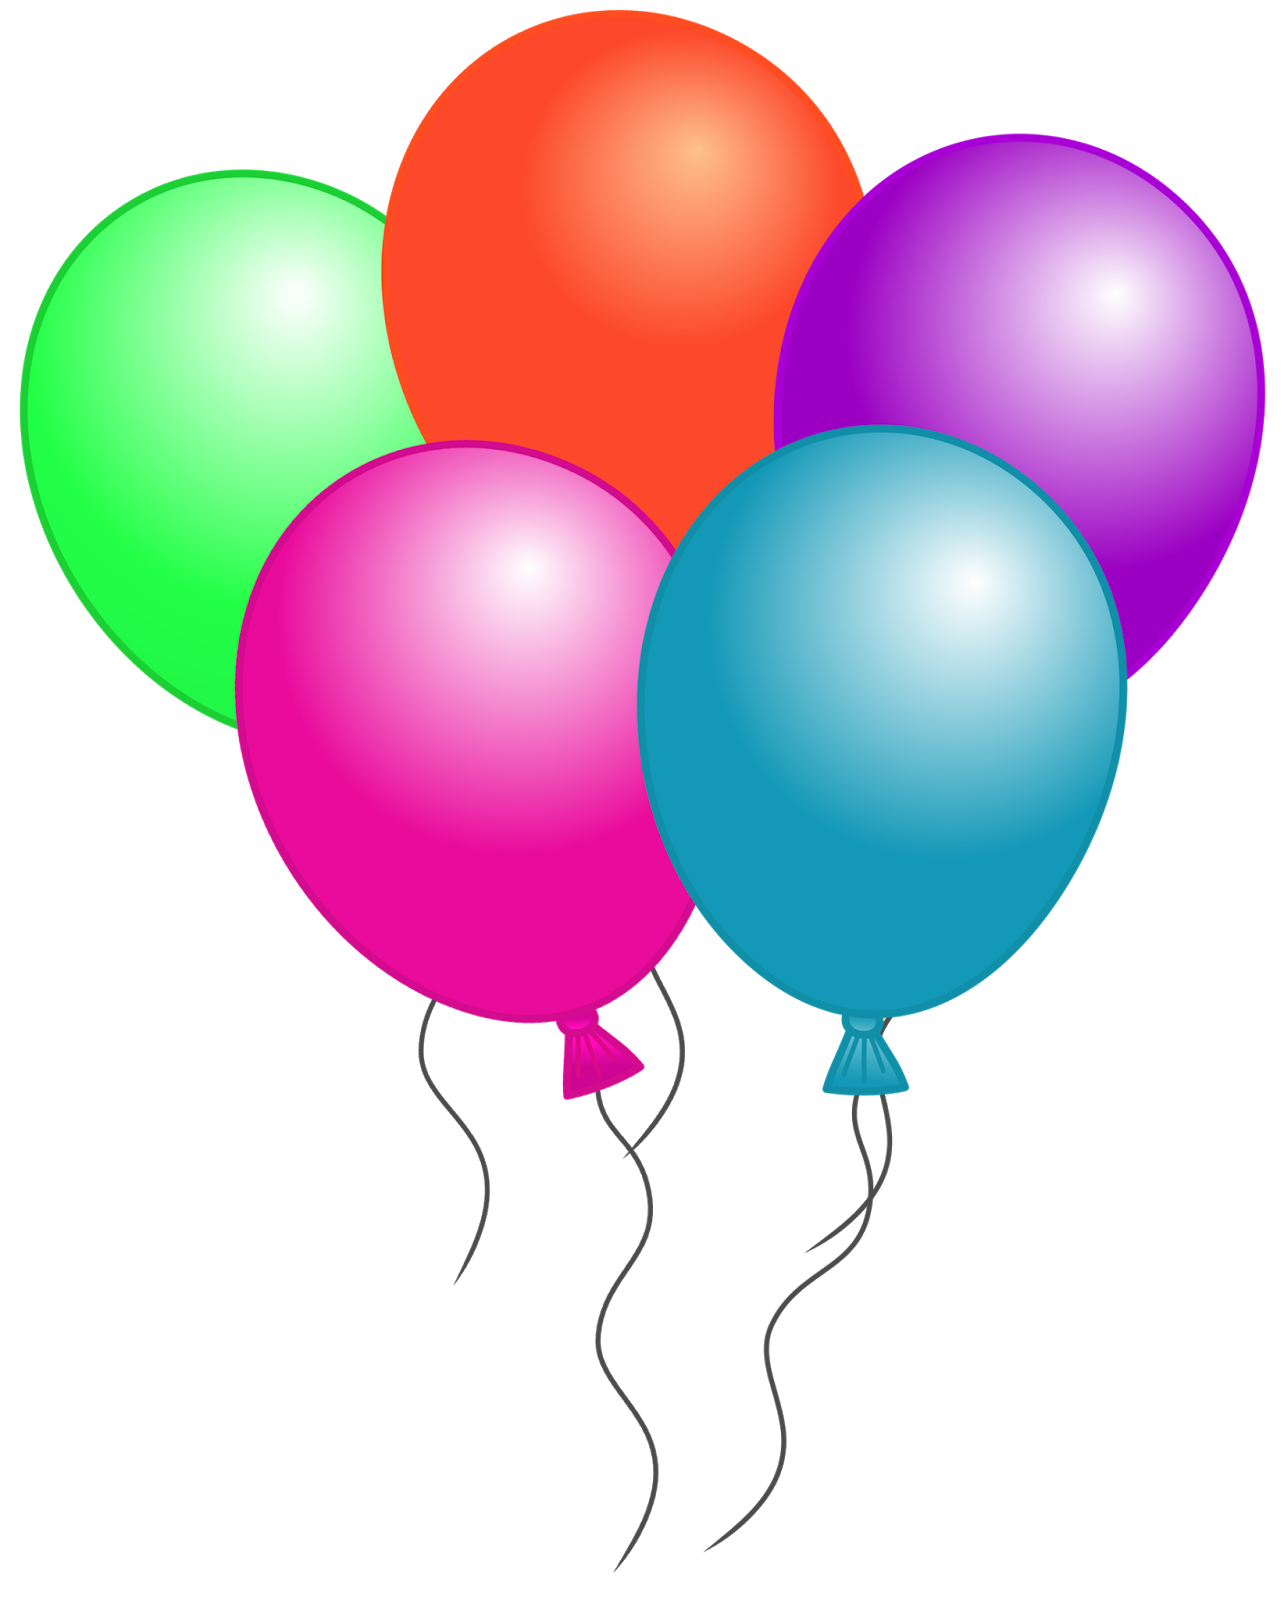 Balloons images